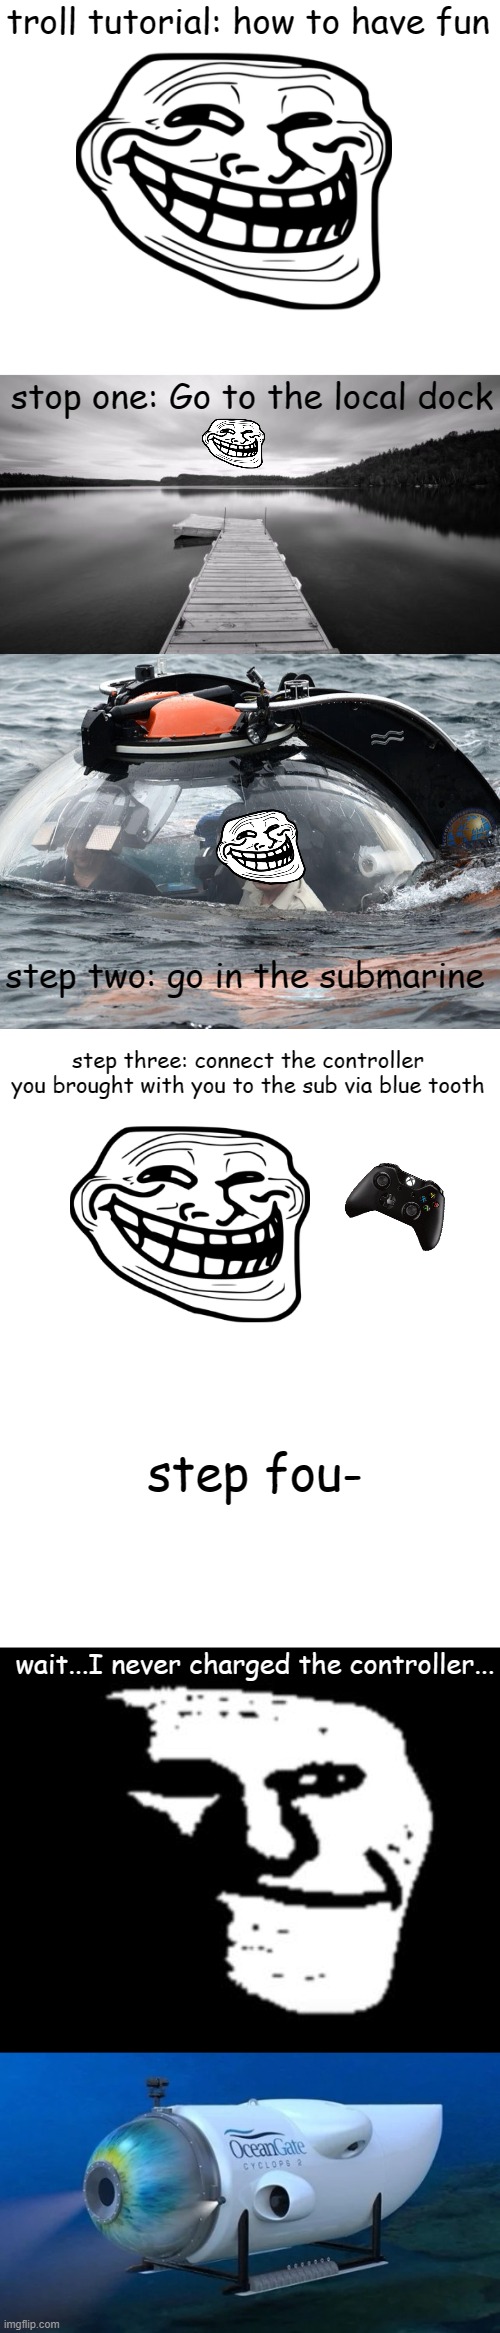 troll tutorial: how to have fun; stop one: Go to the local dock; step two: go in the submarine; step three: connect the controller you brought with you to the sub via blue tooth; step fou-; wait...I never charged the controller... | image tagged in dock,putin submarine,memes,blank transparent square,depressed troll face,oceangate | made w/ Imgflip meme maker